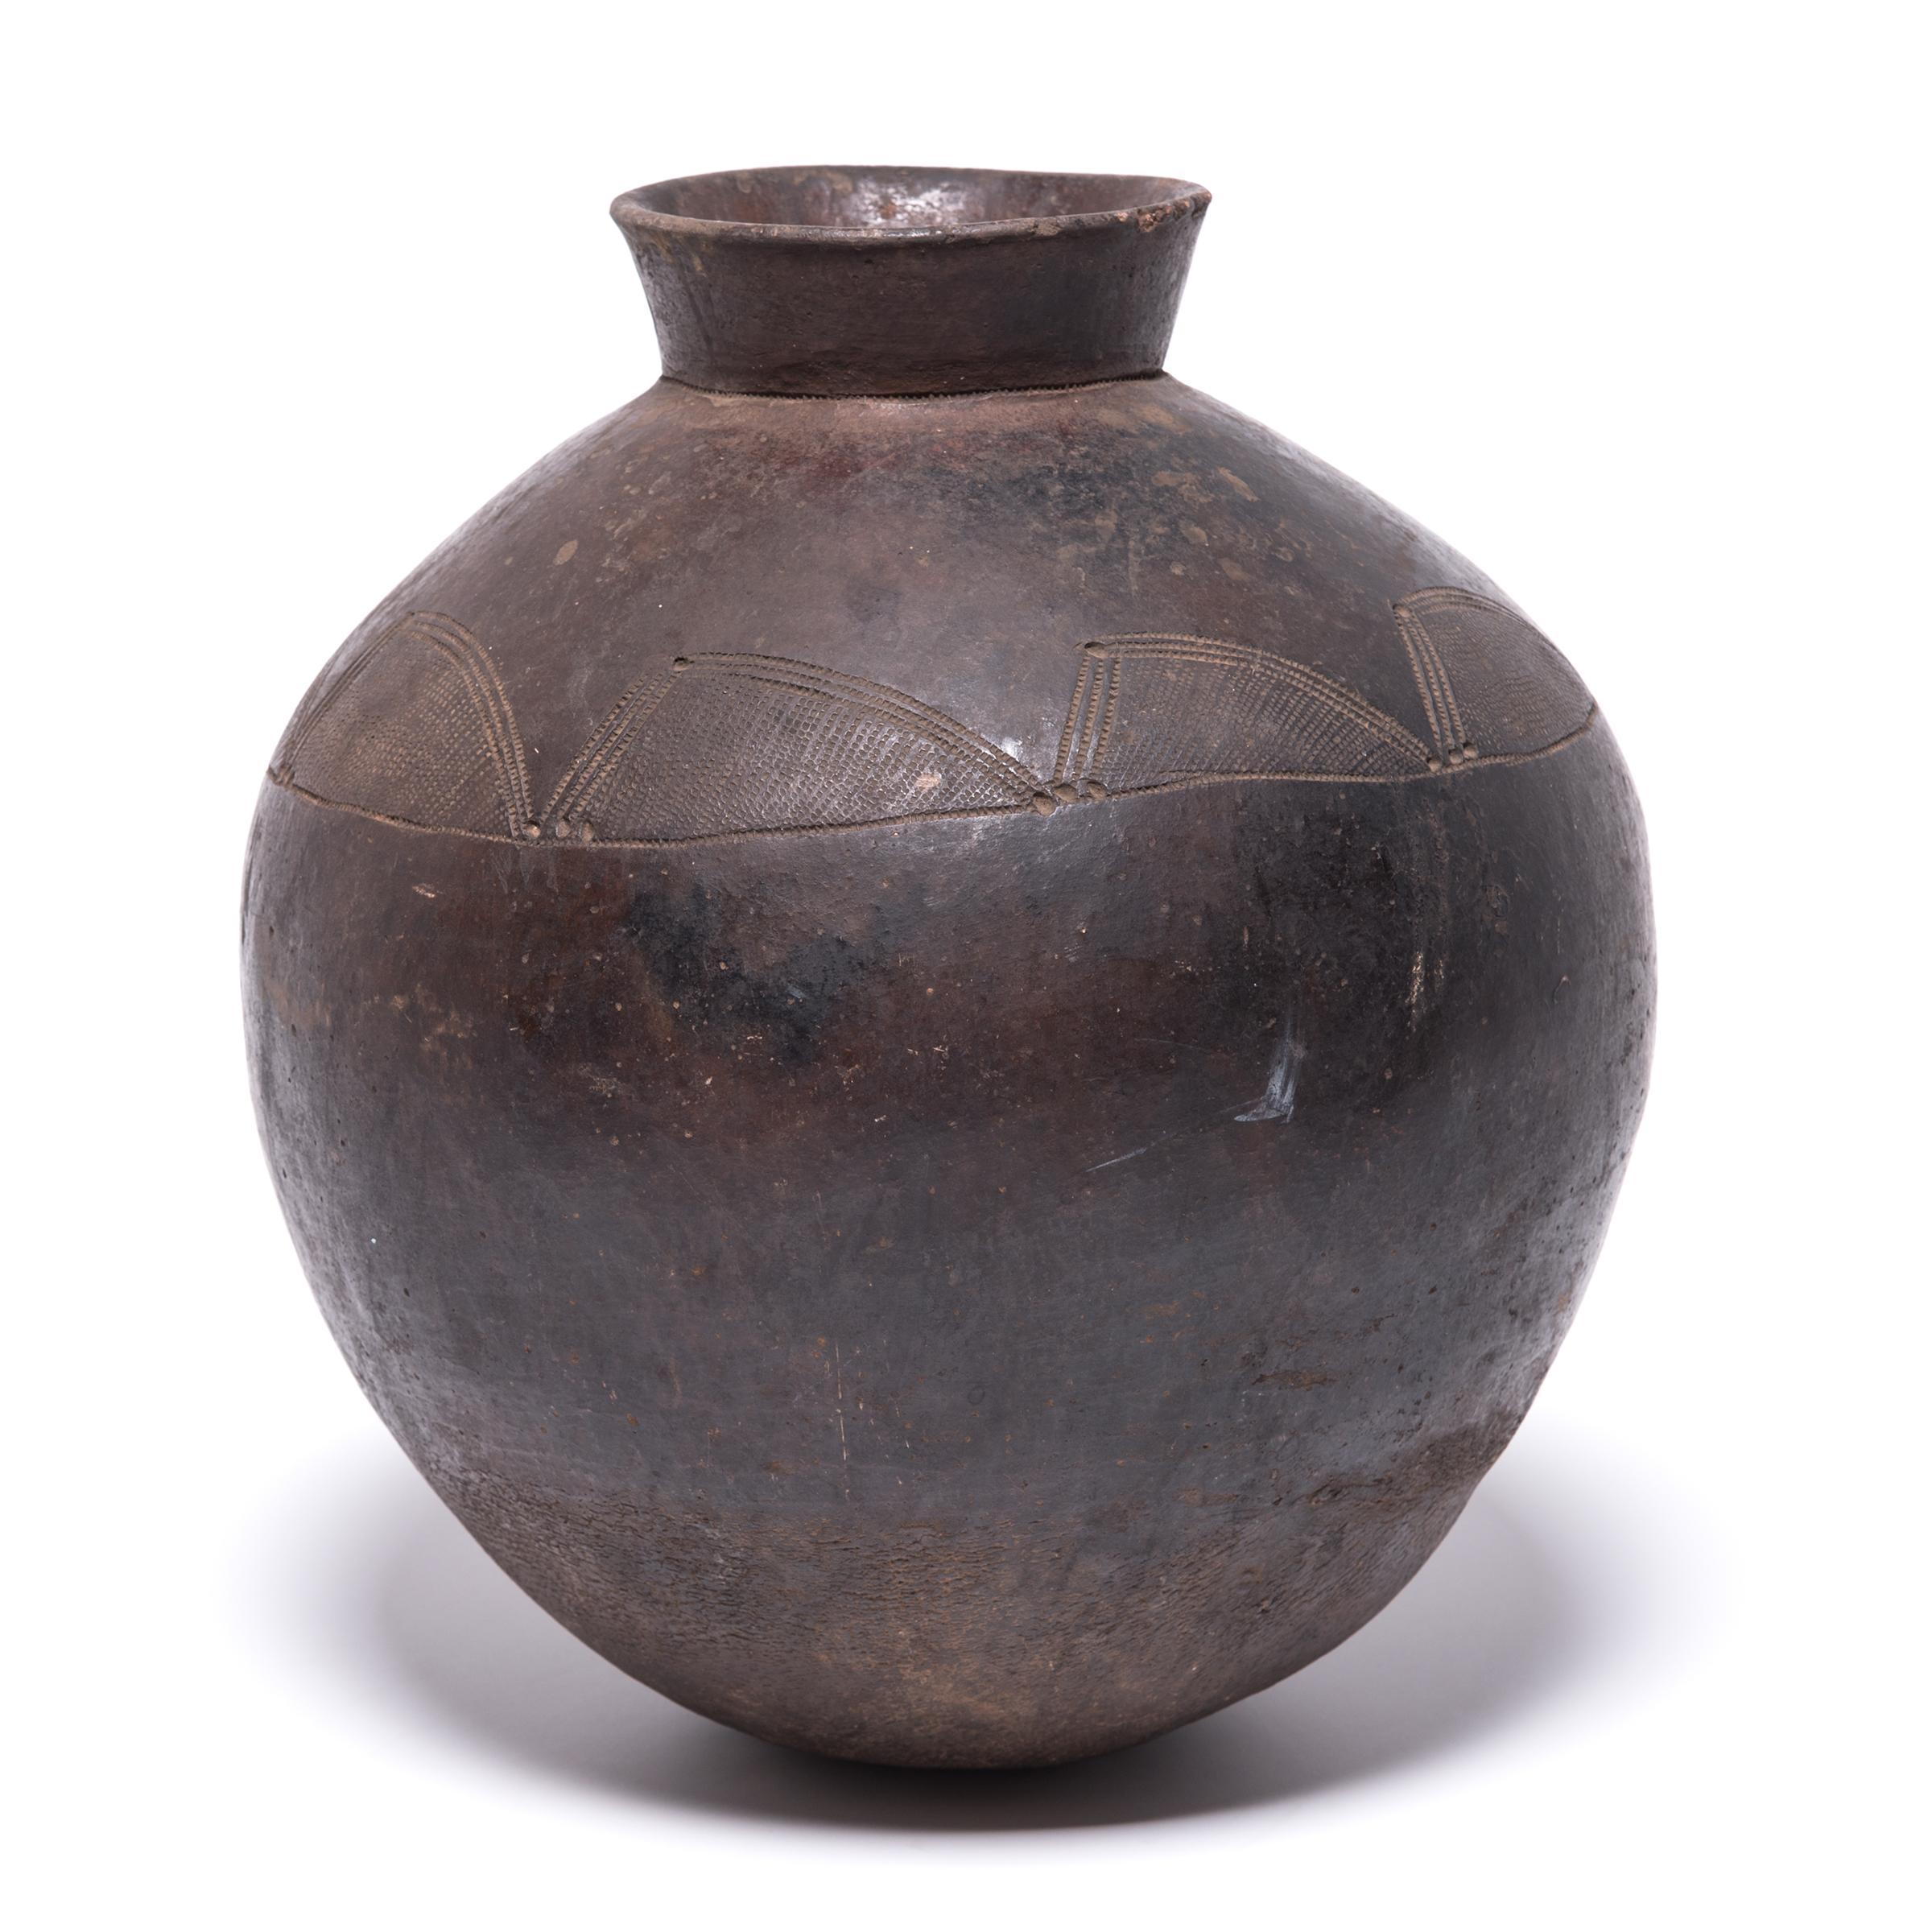 The Lobi peoples of Ghana and Burkina Faso have a deep focus on agriculture, leaving less of their time for artistic endeavors. This difference in focus makes a decorated vessel such as this a particularly rare find. The geometric engravings were